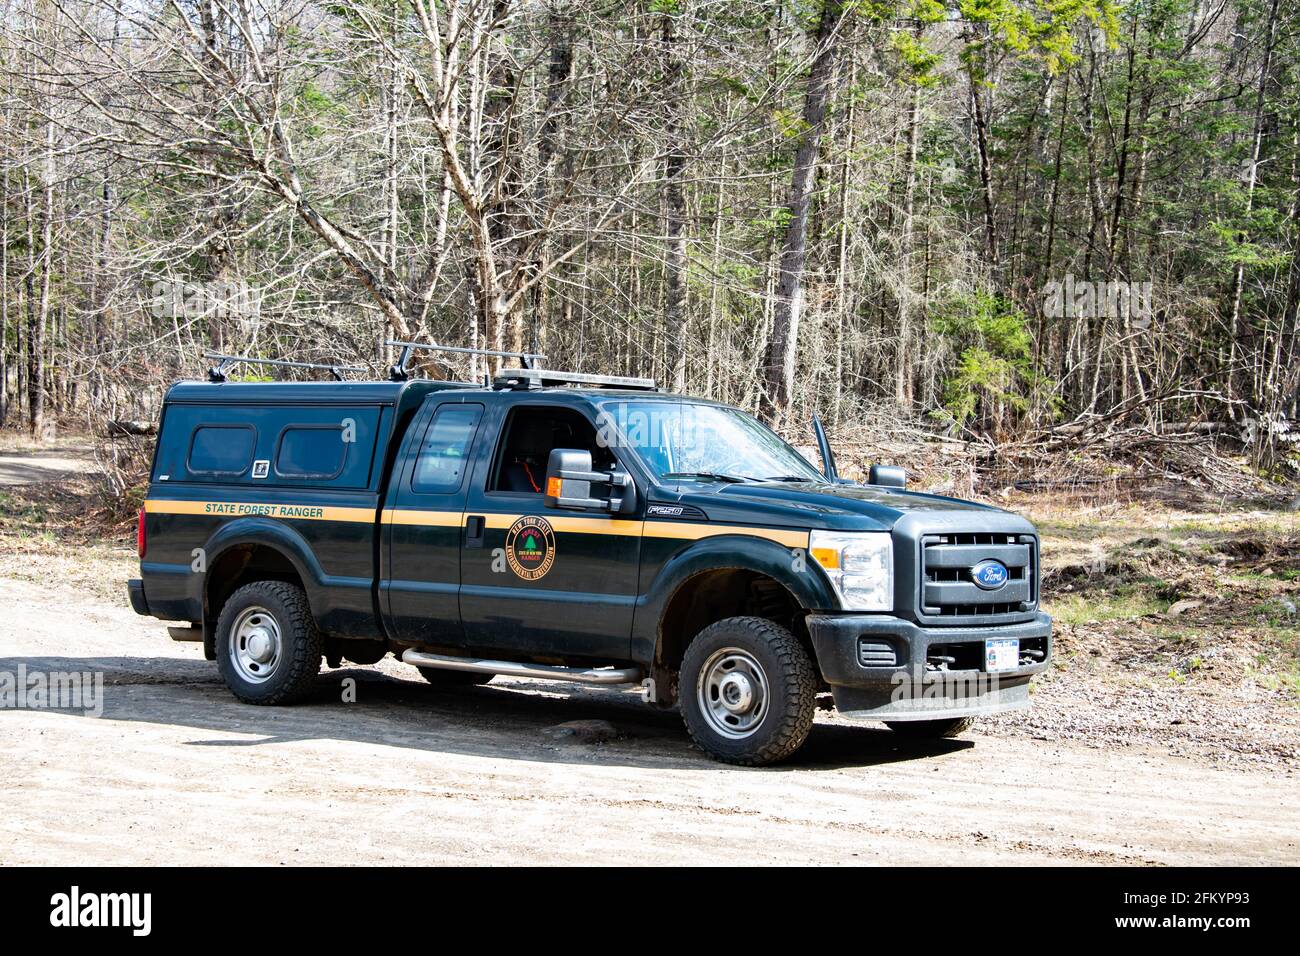 A New York State Department of Environmental Conservation Forest Ranger pickup truck parked on a dirt road in the Adirondack Park wilderness. Stock Photo